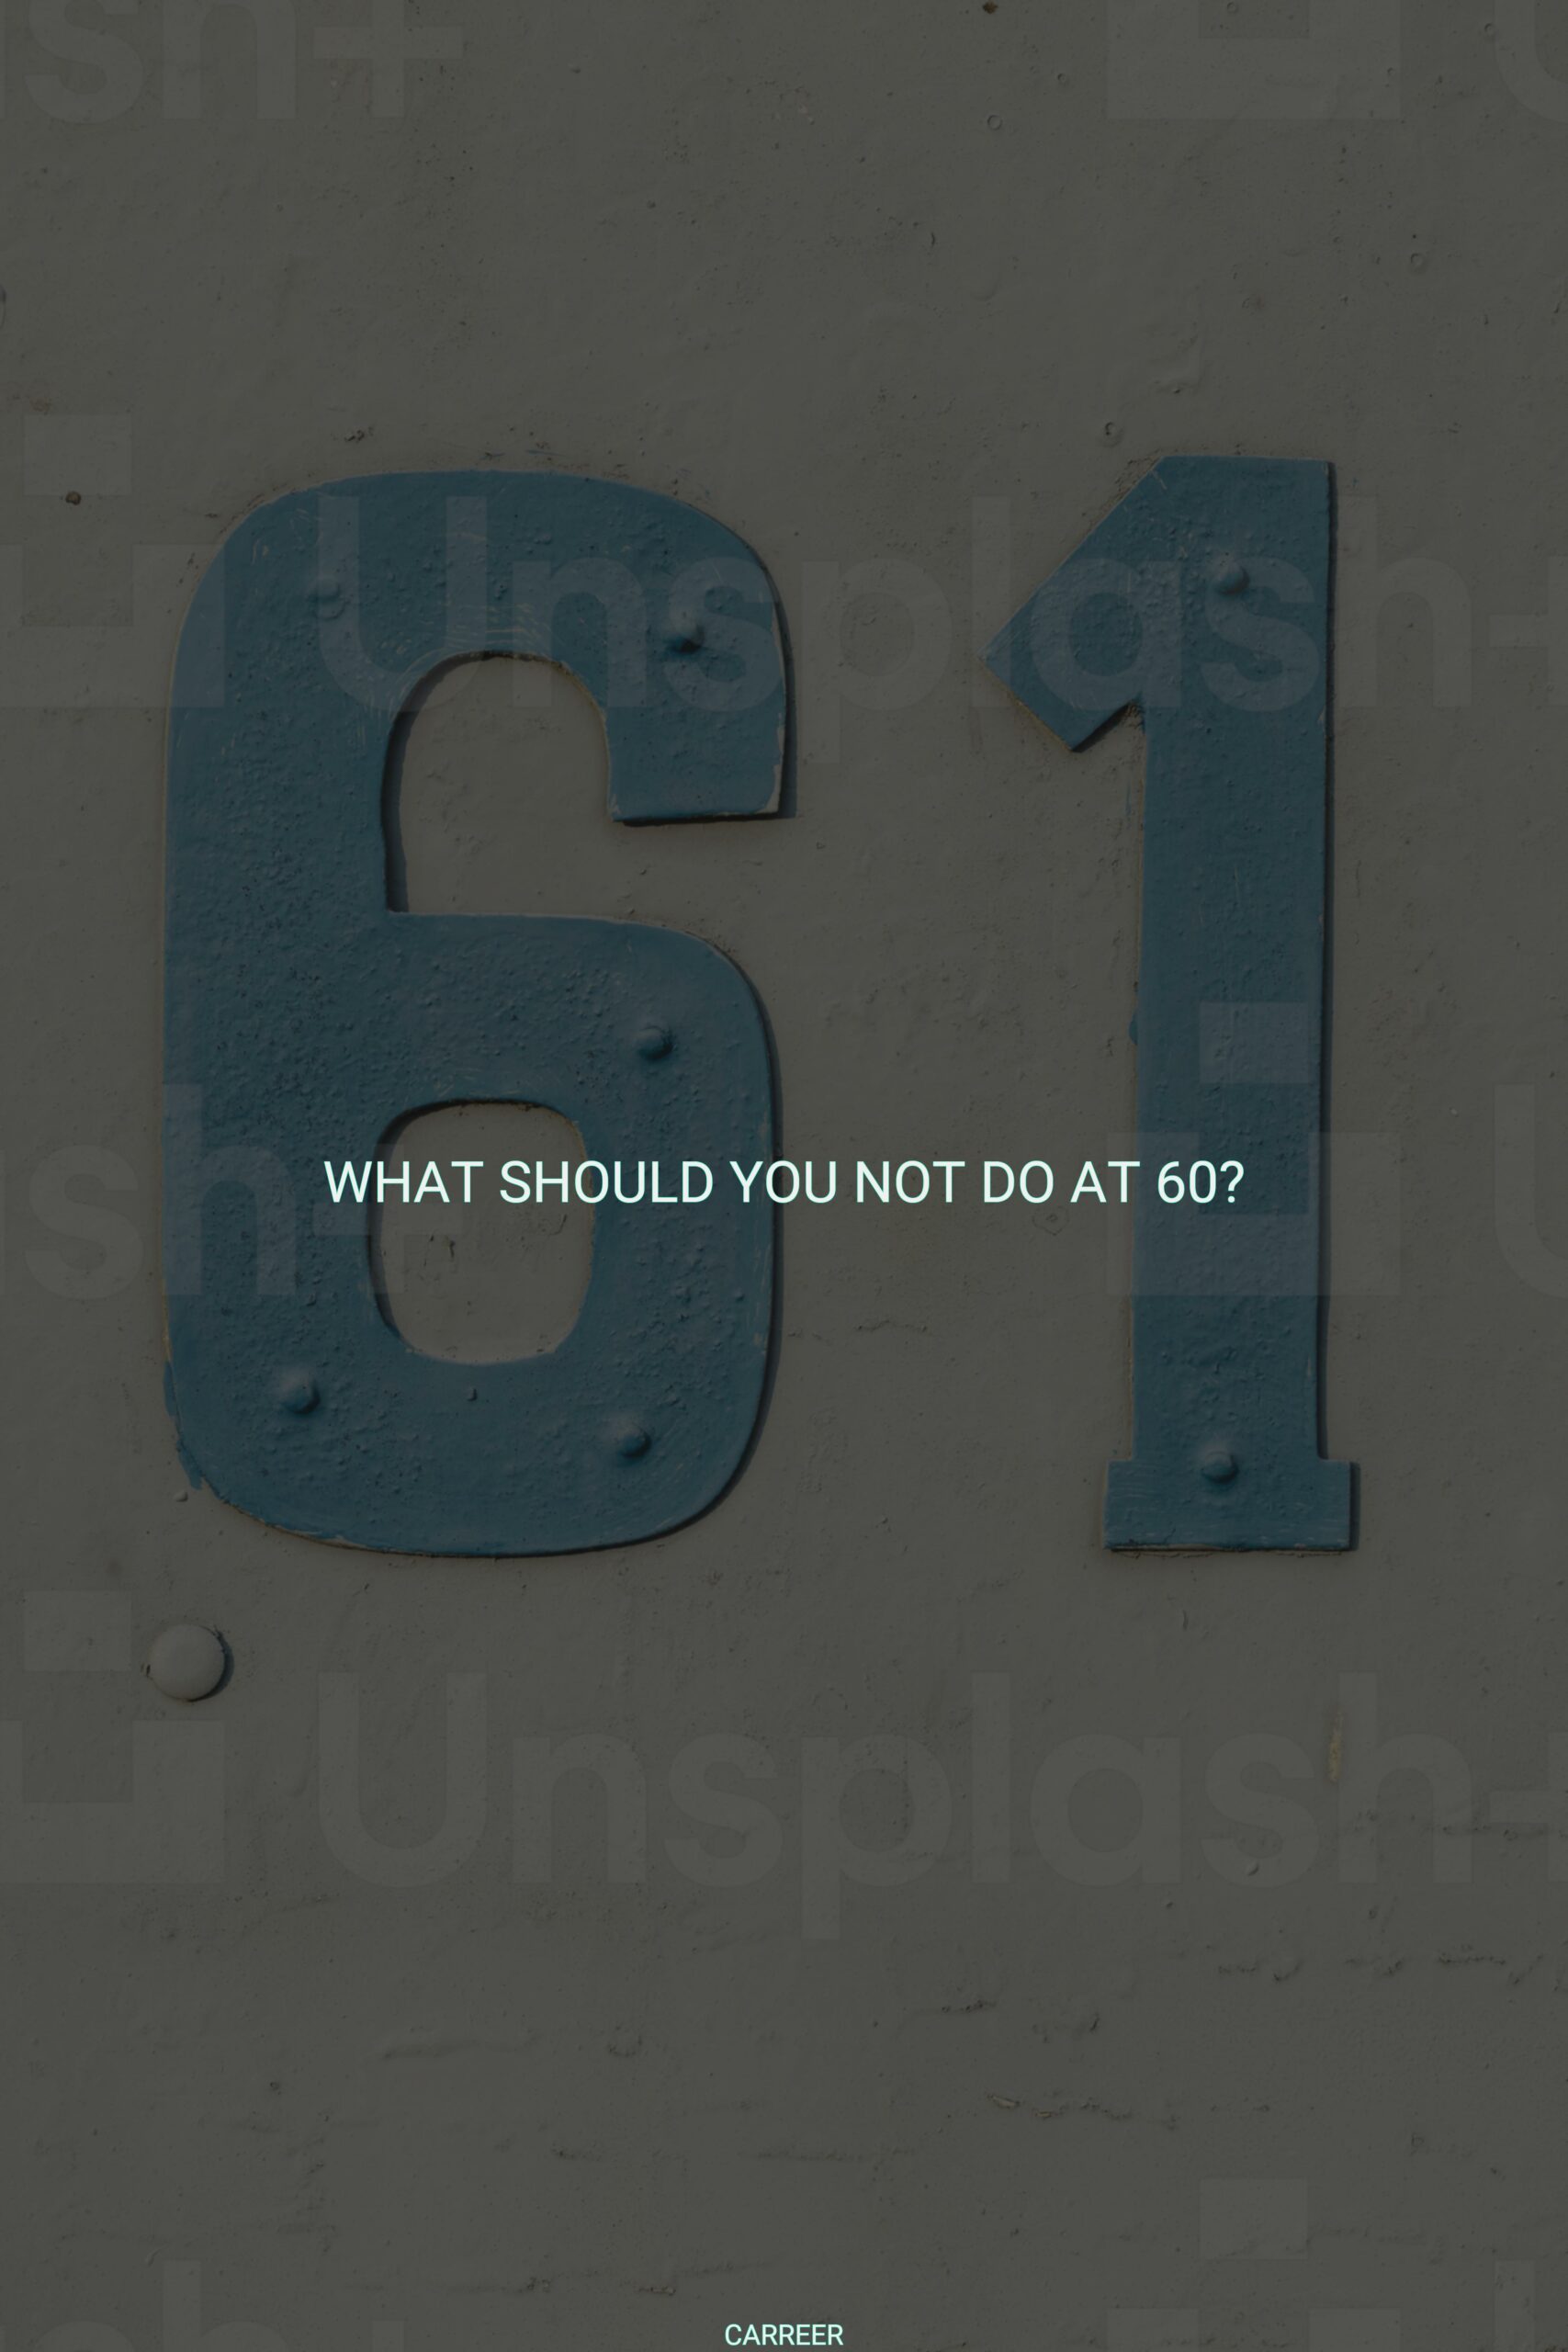 What should you not do at 60?